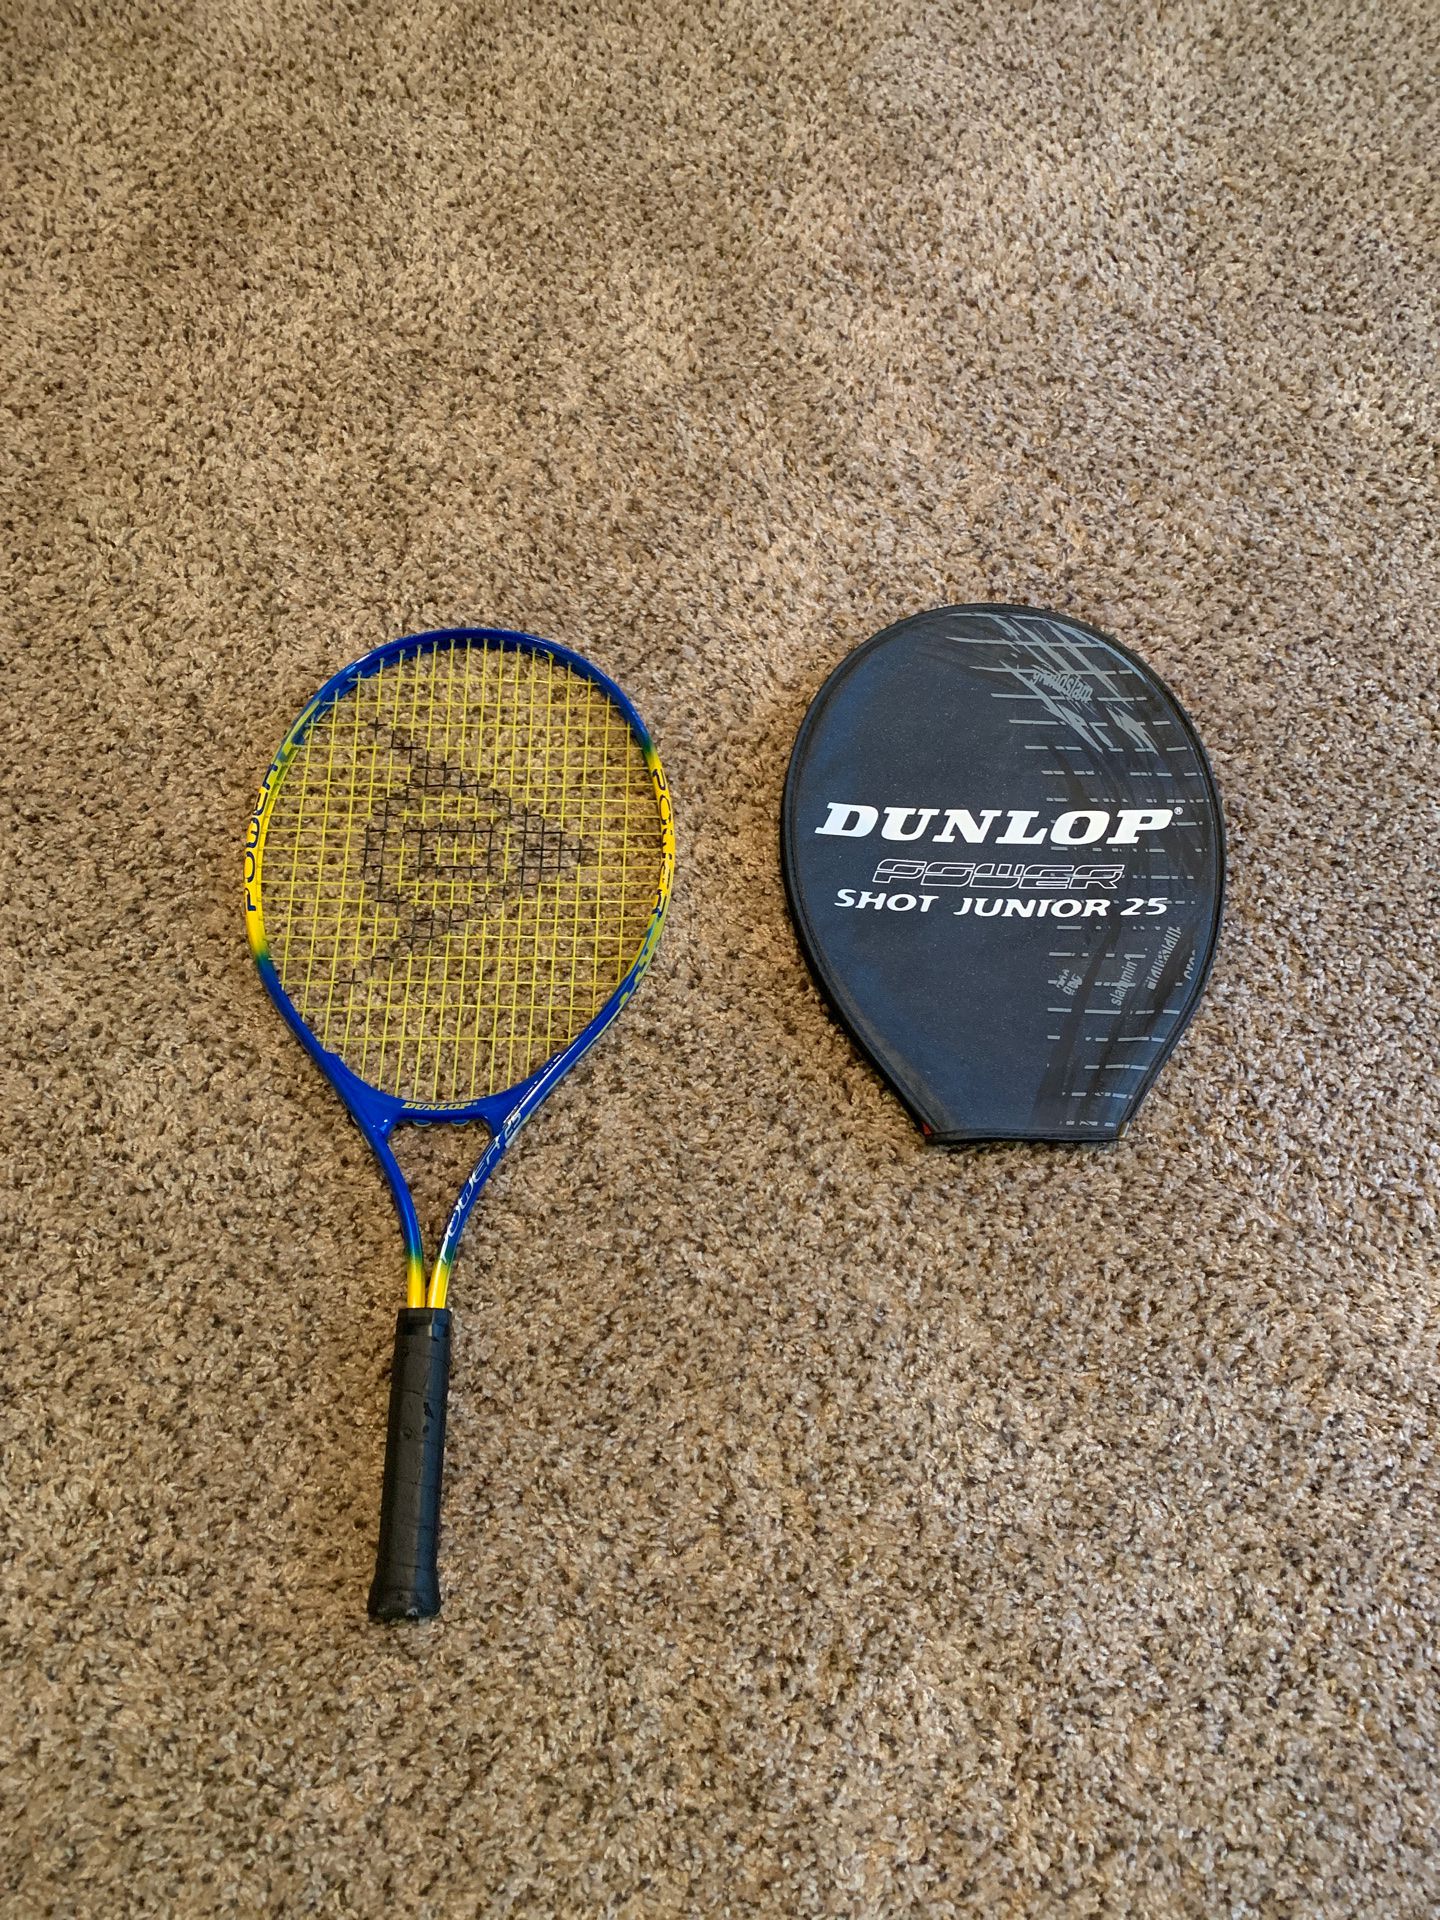 DUNLOP TENNIS RACKET (BARELY USED!!)